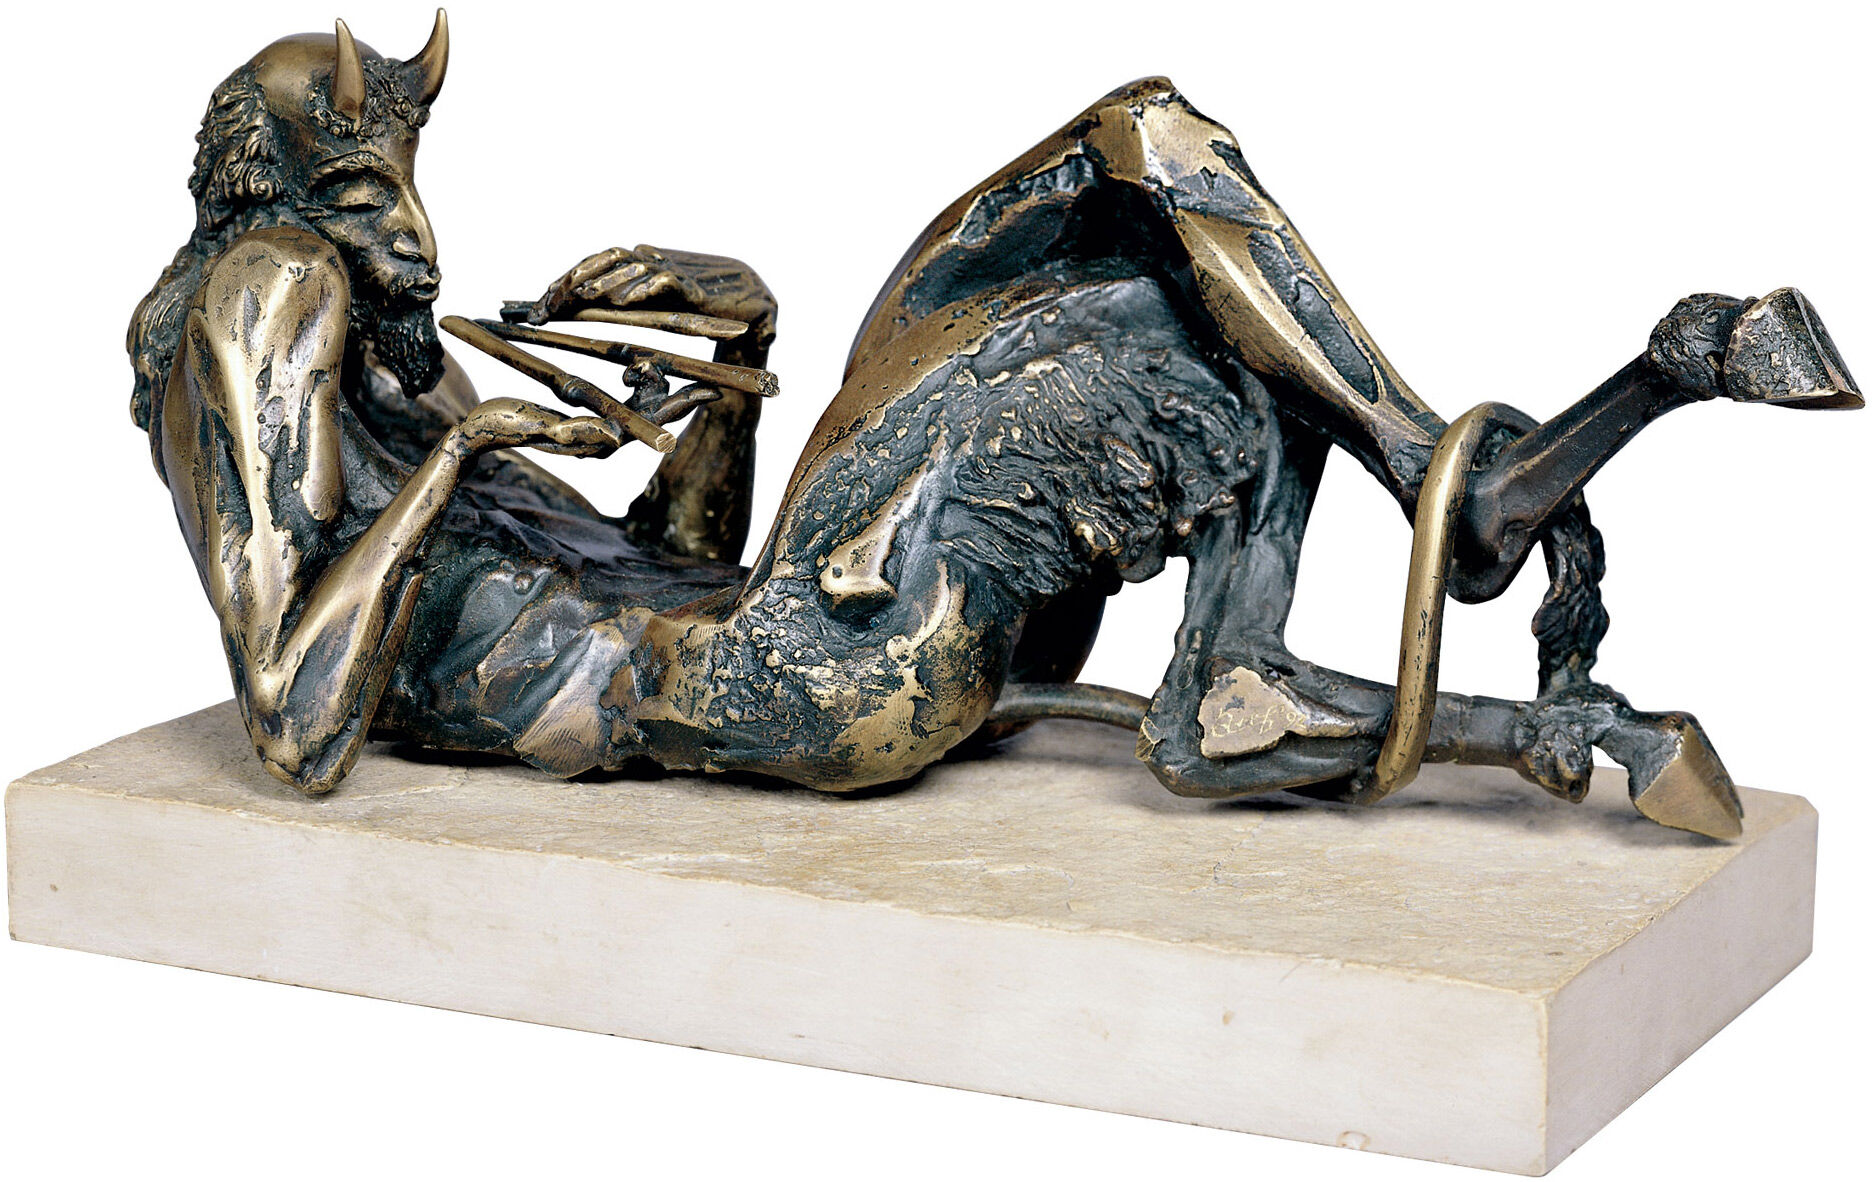 Sculpture "Pan", bronze on natural stone by Nikolay Anev